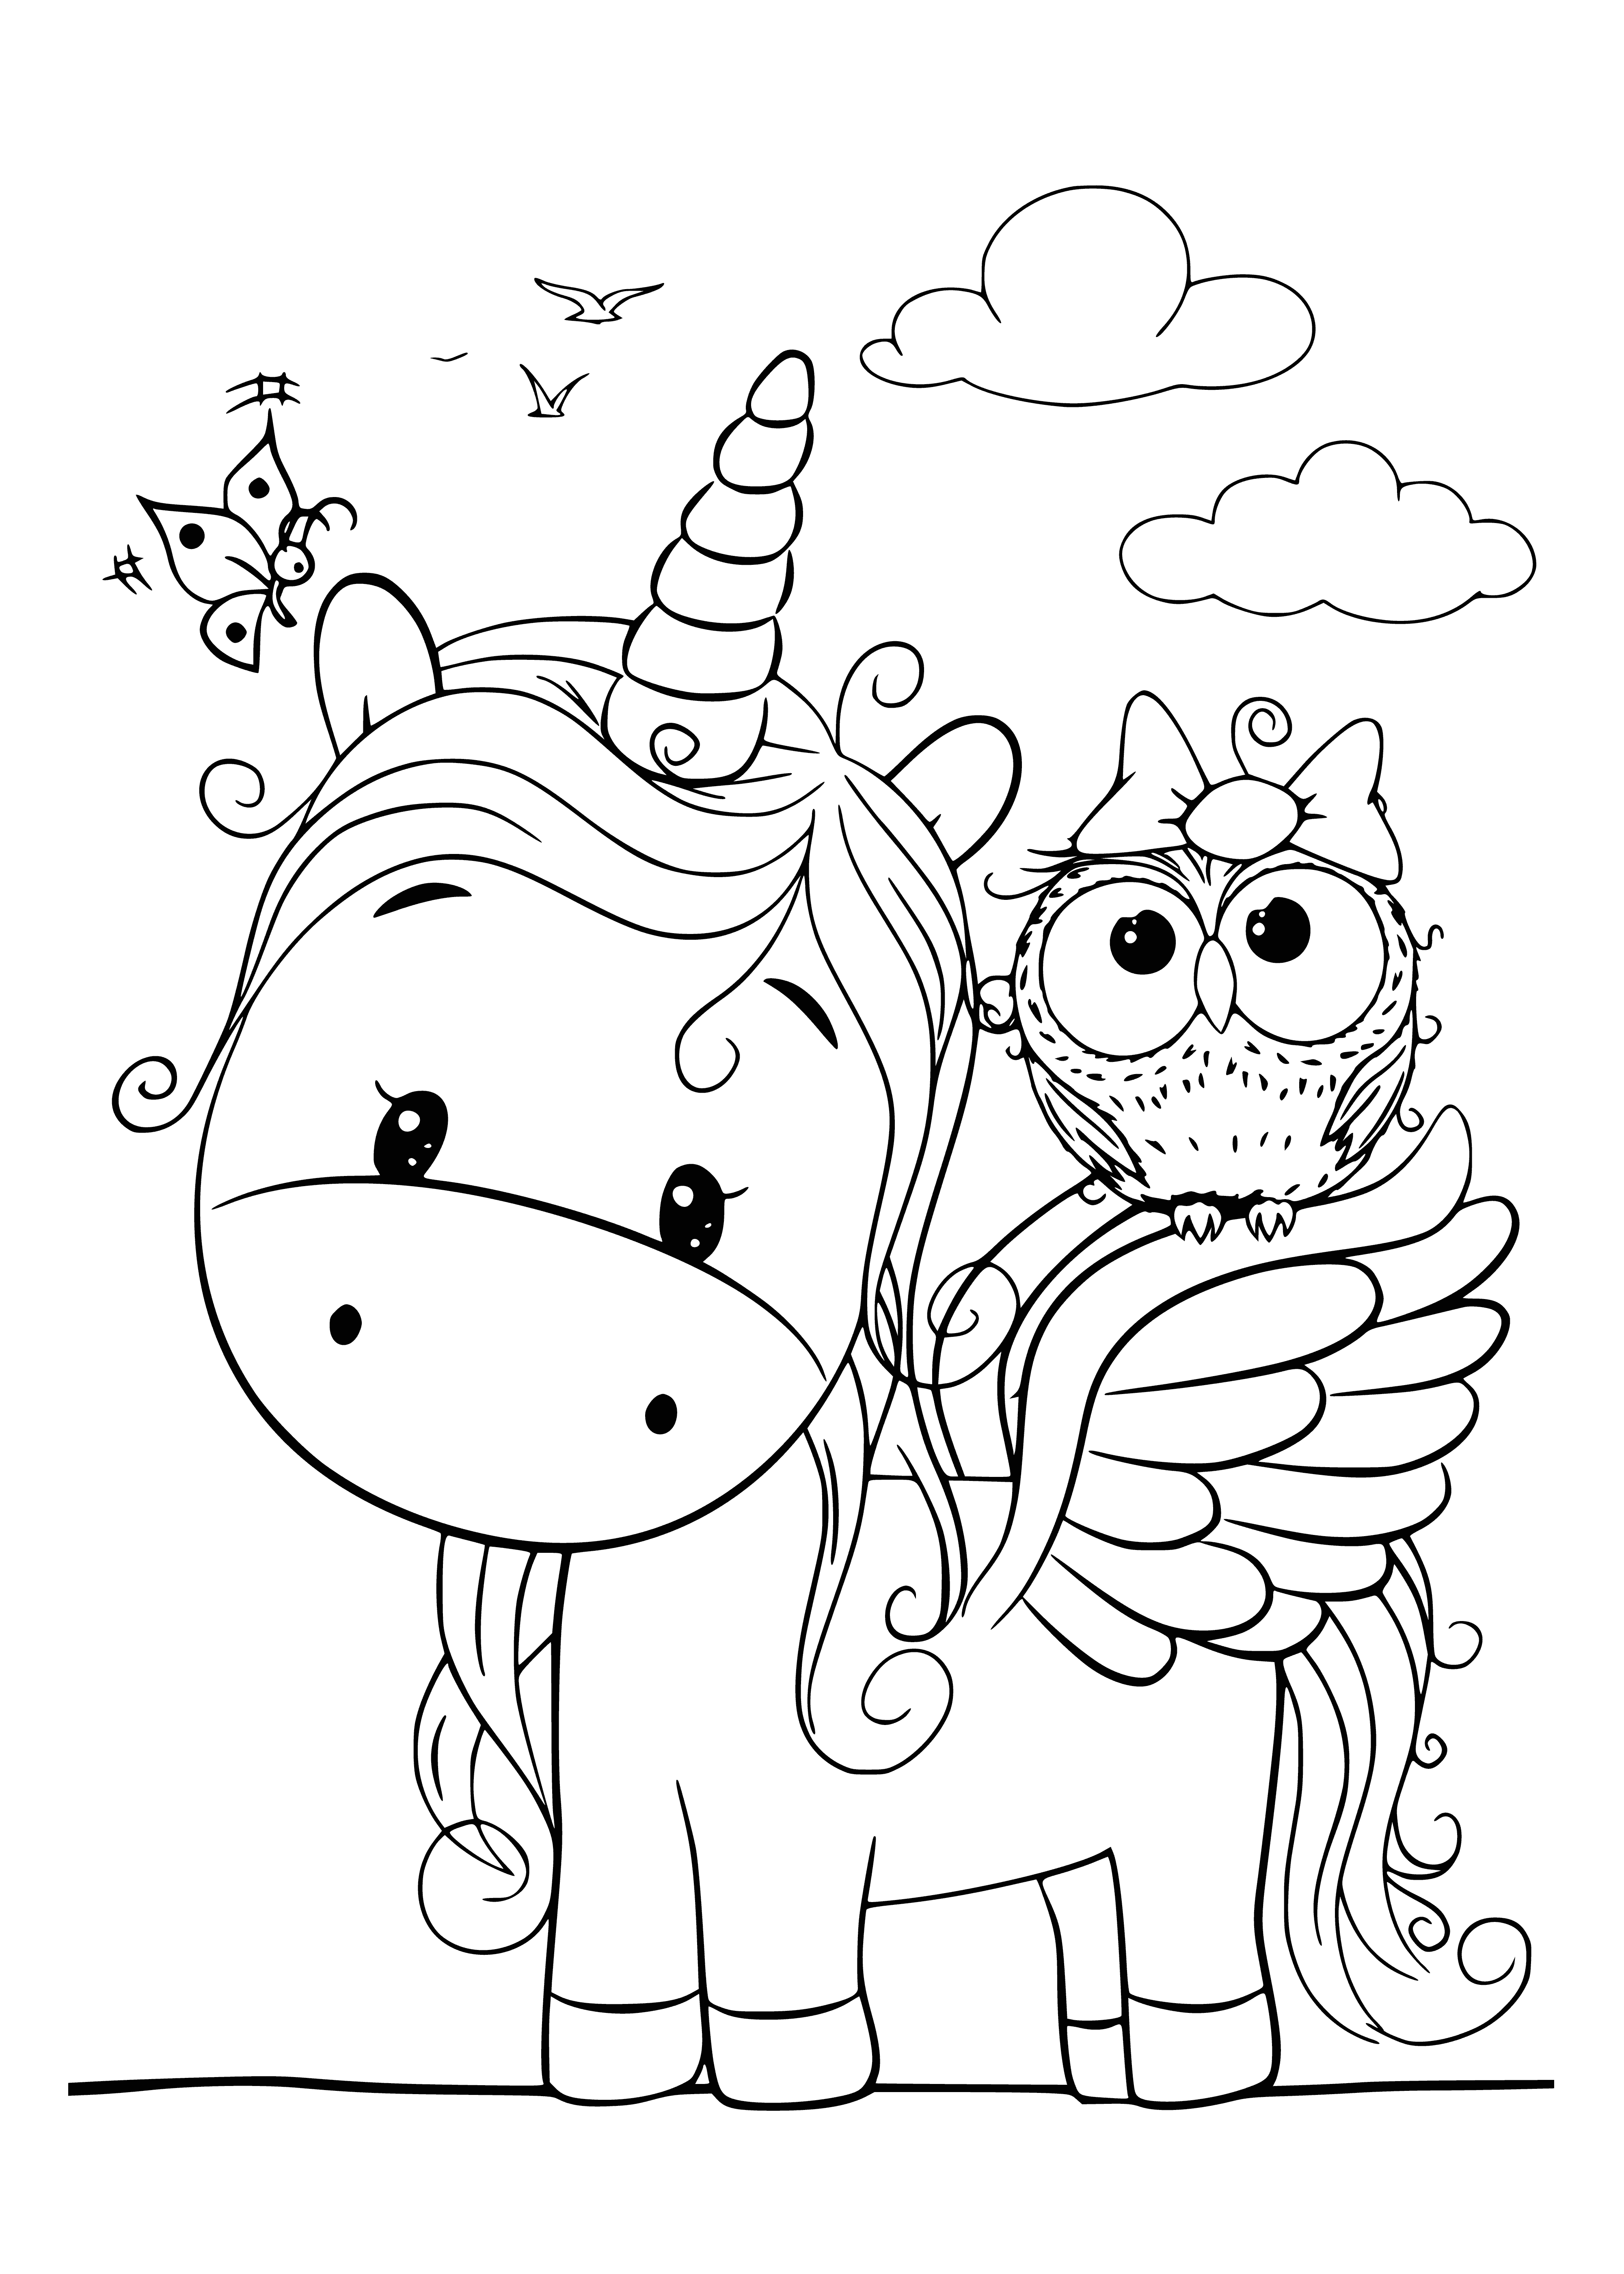 Lovely friends coloring page